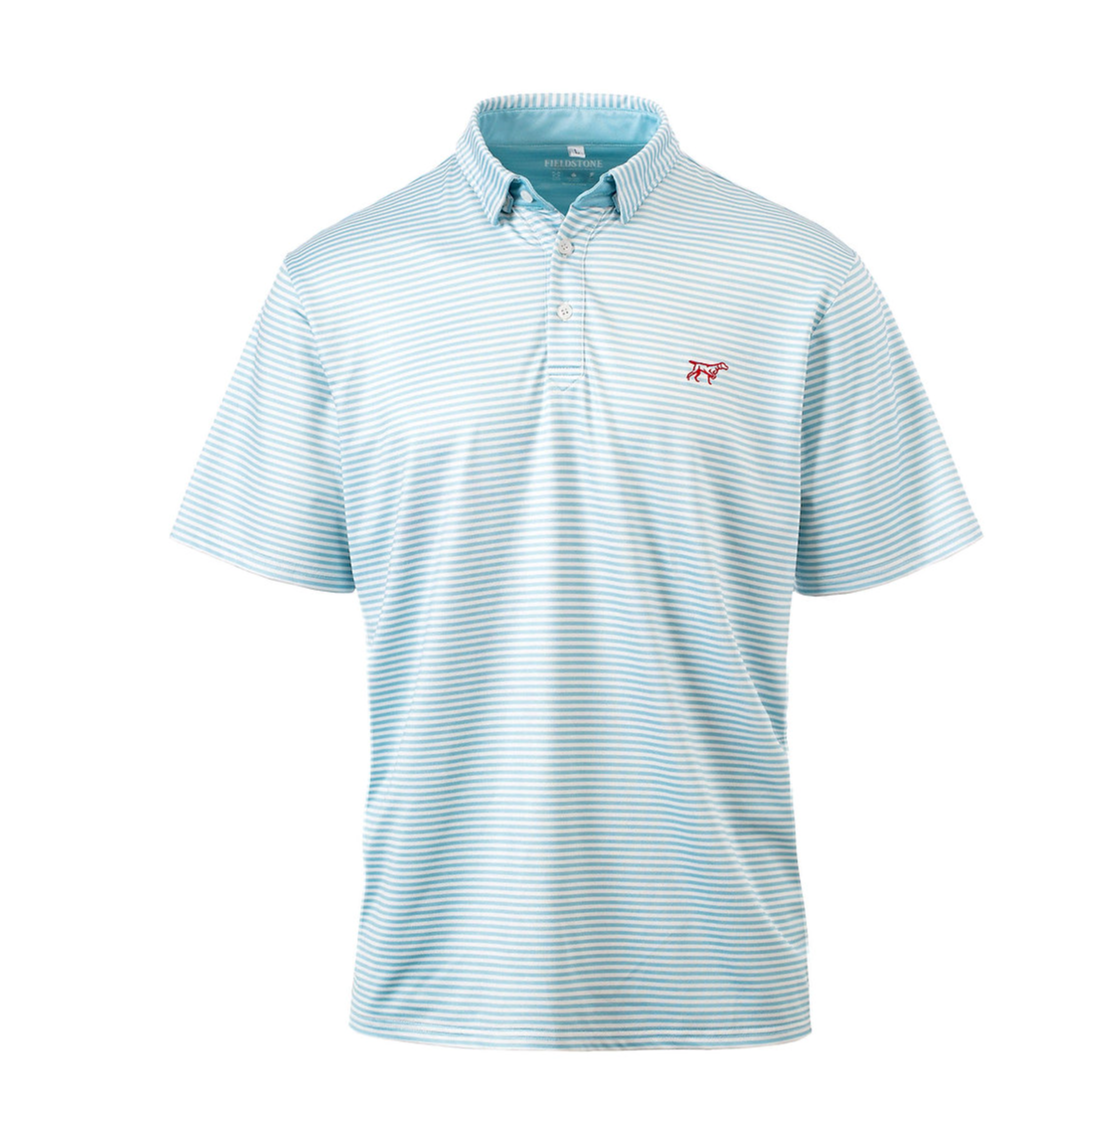 The Marshall Polo Baby Blue/White